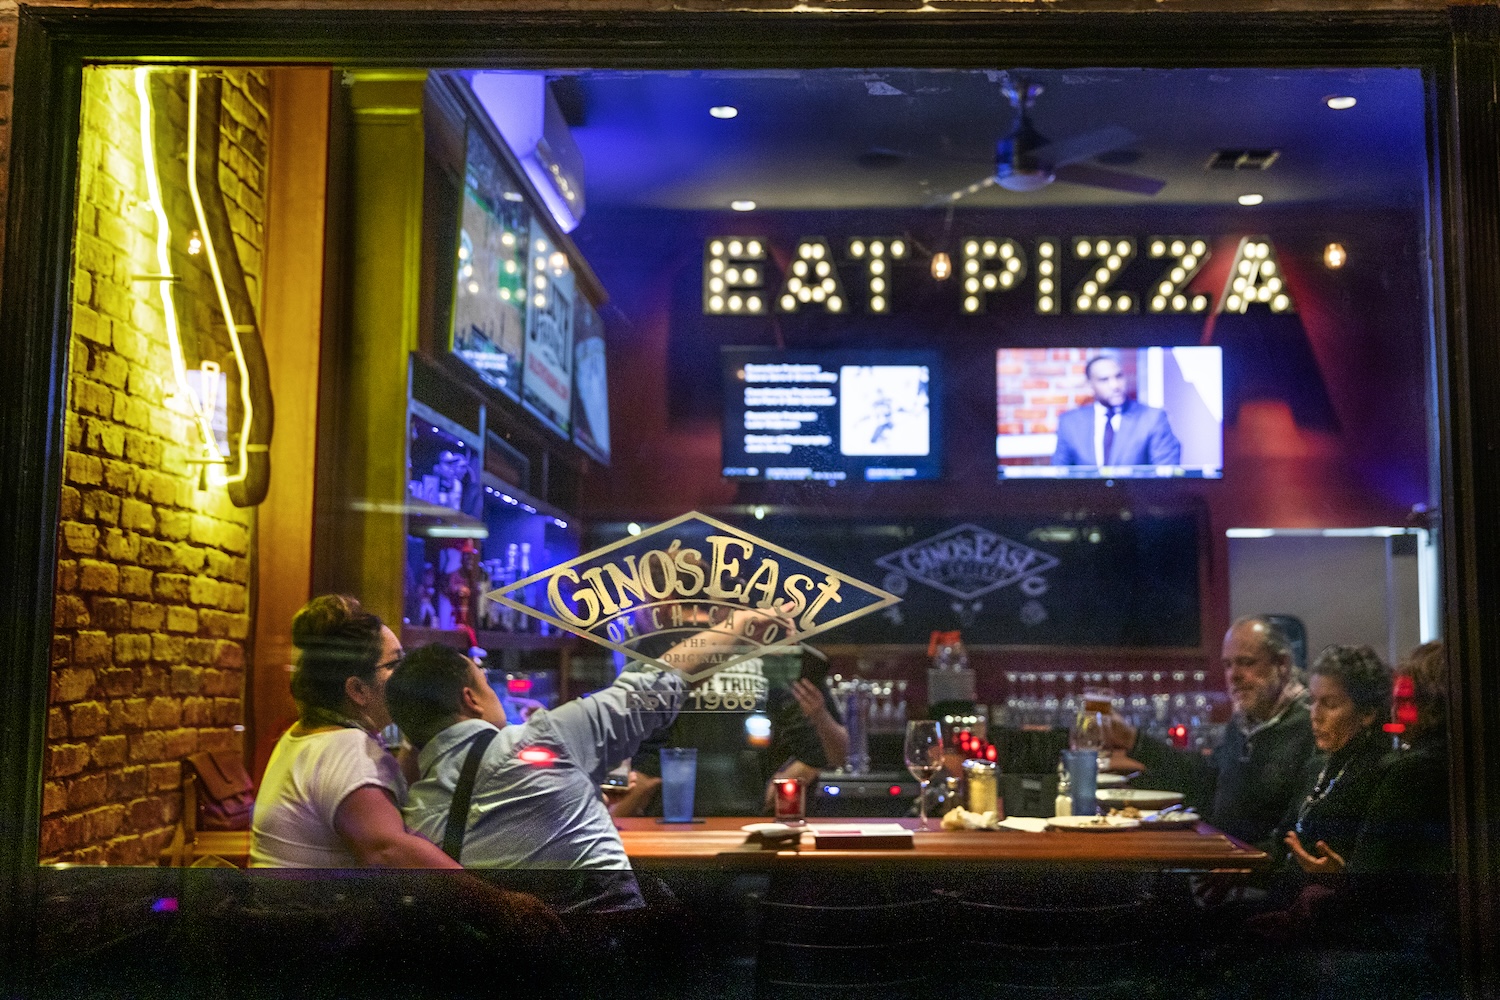 storefront window, eat pizza light up sign inside, couple sitting pointing, tvs 